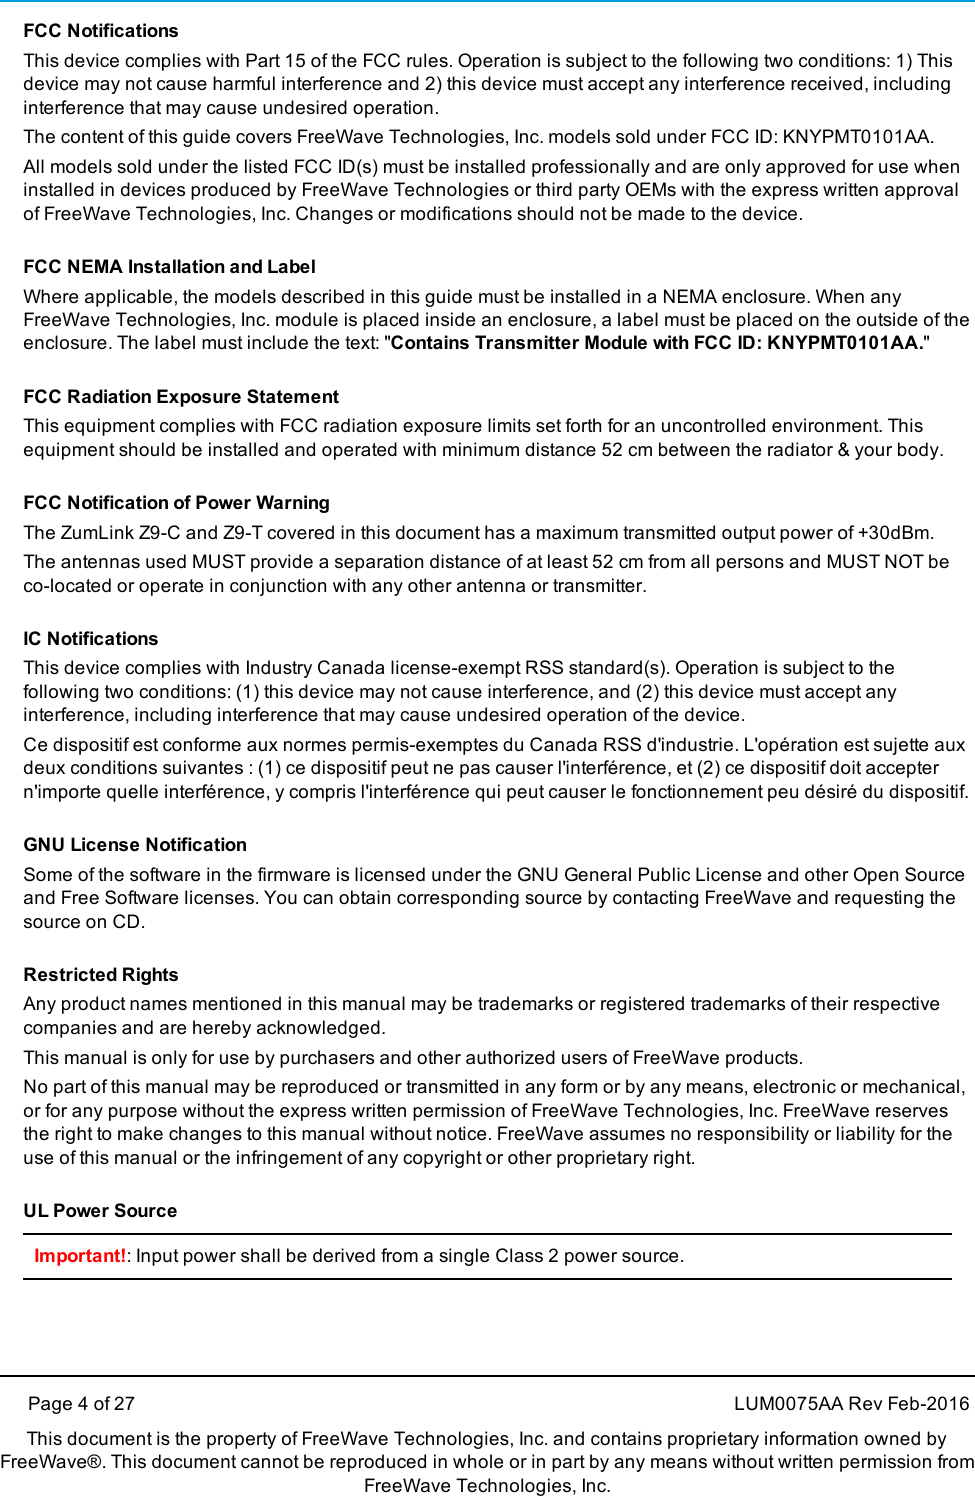 Page 4 of 27 LUM0075AA Rev Feb-2016This document is the property of FreeWave Technologies, Inc. and contains proprietary information owned byFreeWave®. This document cannot be reproduced in whole or in part by any means without written permission fromFreeWave Technologies, Inc.FCC NotificationsThis device complies with Part 15 of the FCC rules. Operation is subject to the following two conditions: 1) Thisdevice may not cause harmful interference and 2) this device must accept any interference received, includinginterference that may cause undesired operation.The content of this guide covers FreeWave Technologies, Inc. models sold under FCC ID: KNYPMT0101AA.All models sold under the listed FCC ID(s) must be installed professionally and are only approved for use wheninstalled in devices produced by FreeWave Technologies or third party OEMs with the express written approvalof FreeWave Technologies, Inc. Changes or modifications should not be made to the device.FCC NEMA Installation and LabelWhere applicable, the models described in this guide must be installed in a NEMA enclosure. When anyFreeWave Technologies, Inc. module is placed inside an enclosure, a label must be placed on the outside of theenclosure. The label must include the text: &quot;Contains Transmitter Module with FCC ID: KNYPMT0101AA.&quot;FCC Radiation Exposure StatementThis equipment complies with FCC radiation exposure limits set forth for an uncontrolled environment. Thisequipment should be installed and operated with minimum distance 52 cm between the radiator &amp; your body.FCC Notification of Power WarningThe ZumLink Z9-C and Z9-T covered in this document has a maximum transmitted output power of +30dBm.The antennas used MUST provide a separation distance of at least 52 cm from all persons and MUST NOT beco-located or operate in conjunction with any other antenna or transmitter.IC NotificationsThis device complies with Industry Canada license-exempt RSS standard(s). Operation is subject to thefollowing two conditions: (1) this device may not cause interference, and (2) this device must accept anyinterference, including interference that may cause undesired operation of the device.Ce dispositif est conforme aux normes permis-exemptes du Canada RSS d&apos;industrie. L&apos;opération est sujette auxdeux conditions suivantes : (1) ce dispositif peut ne pas causer l&apos;interférence, et (2) ce dispositif doit acceptern&apos;importe quelle interférence, y compris l&apos;interférence qui peut causer le fonctionnement peu désiré du dispositif.GNU License NotificationSome of the software in the firmware is licensed under the GNU General Public License and other Open Sourceand Free Software licenses. You can obtain corresponding source by contacting FreeWave and requesting thesource on CD.Restricted RightsAny product names mentioned in this manual may be trademarks or registered trademarks of their respectivecompanies and are hereby acknowledged.This manual is only for use by purchasers and other authorized users of FreeWave products.No part of this manual may be reproduced or transmitted in any form or by any means, electronic or mechanical,or for any purpose without the express written permission of FreeWave Technologies, Inc. FreeWave reservesthe right to make changes to this manual without notice. FreeWave assumes no responsibility or liability for theuse of this manual or the infringement of any copyright or other proprietary right.UL Power SourceImportant!: Input power shall be derived from a single Class 2 power source.